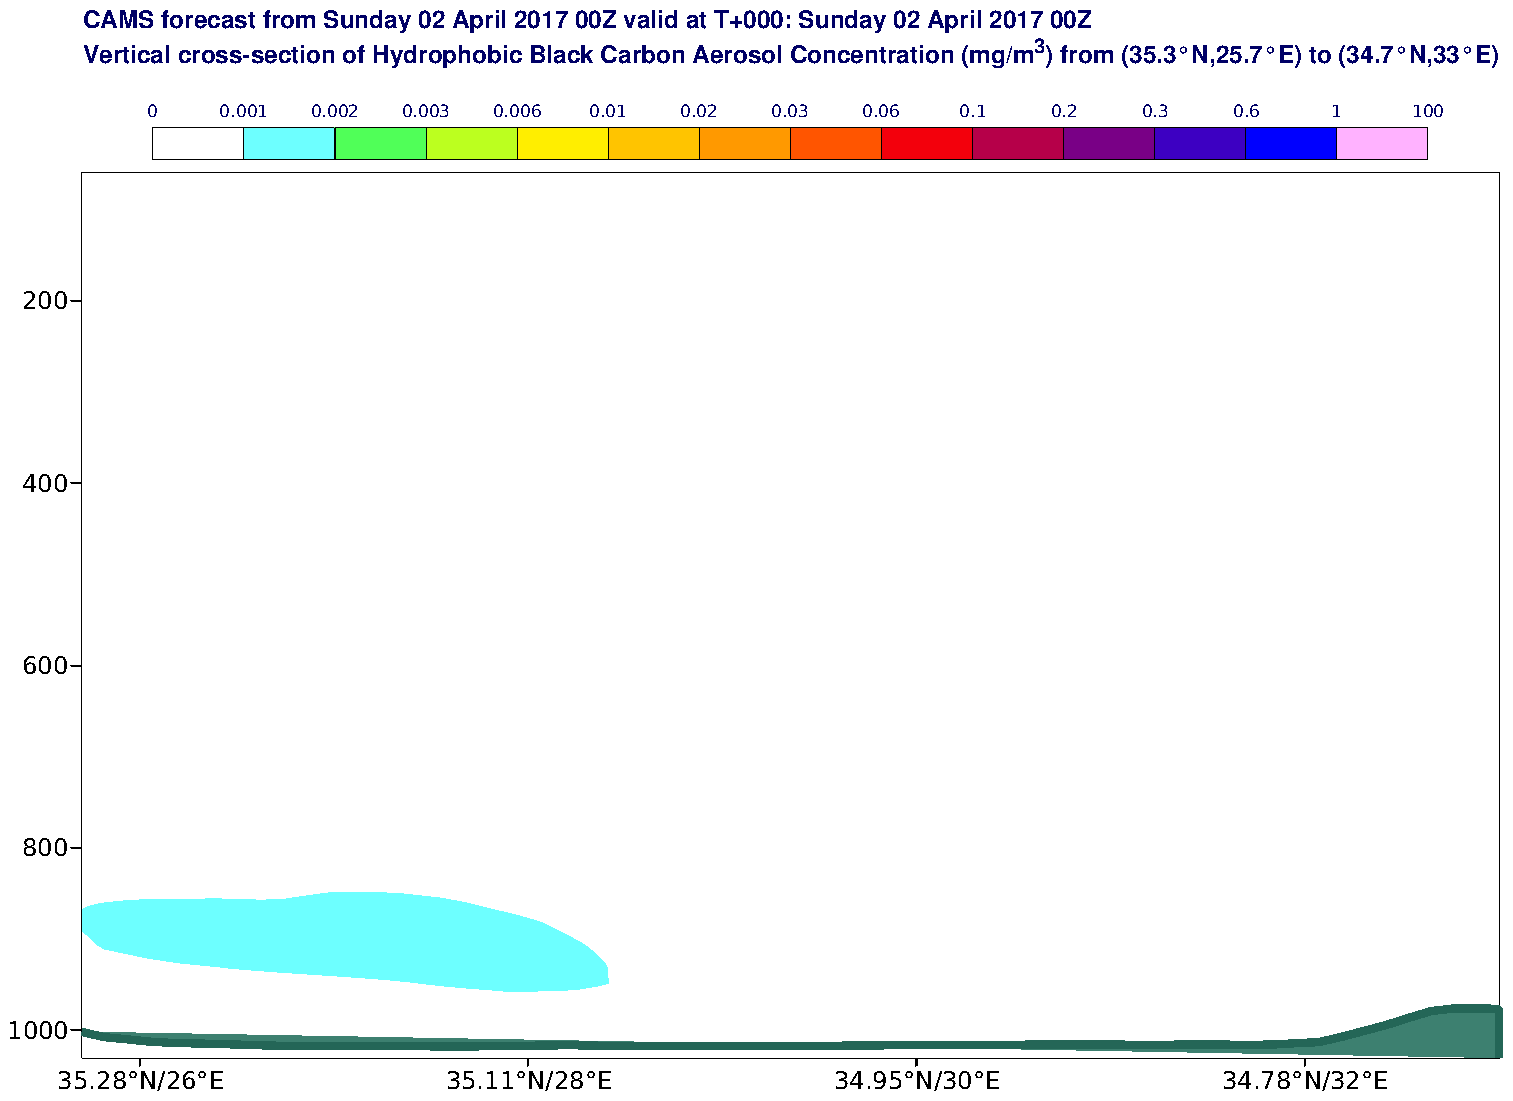 Vertical cross-section of Hydrophobic Black Carbon Aerosol Concentration (mg/m3) valid at T0 - 2017-04-02 00:00